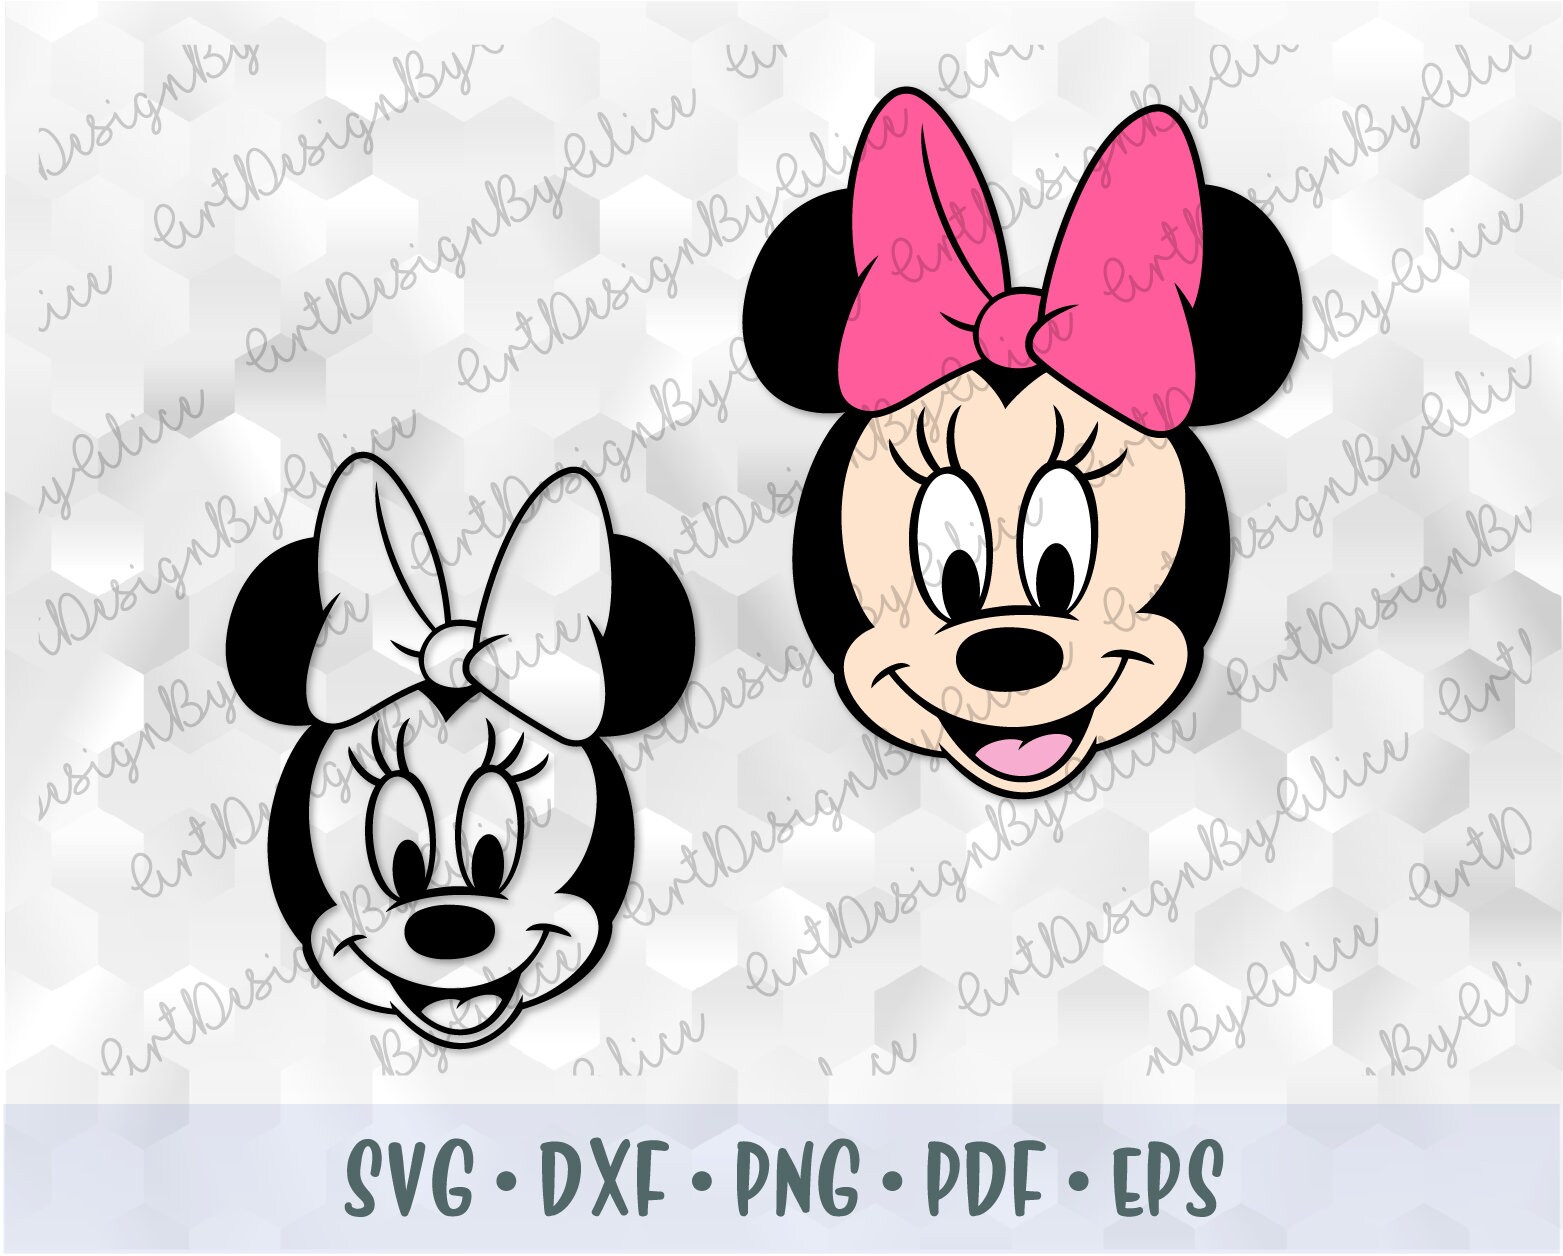 SVG PNG Minnie Mouse Baby Heads Pink Bow Layered Cut file | Etsy